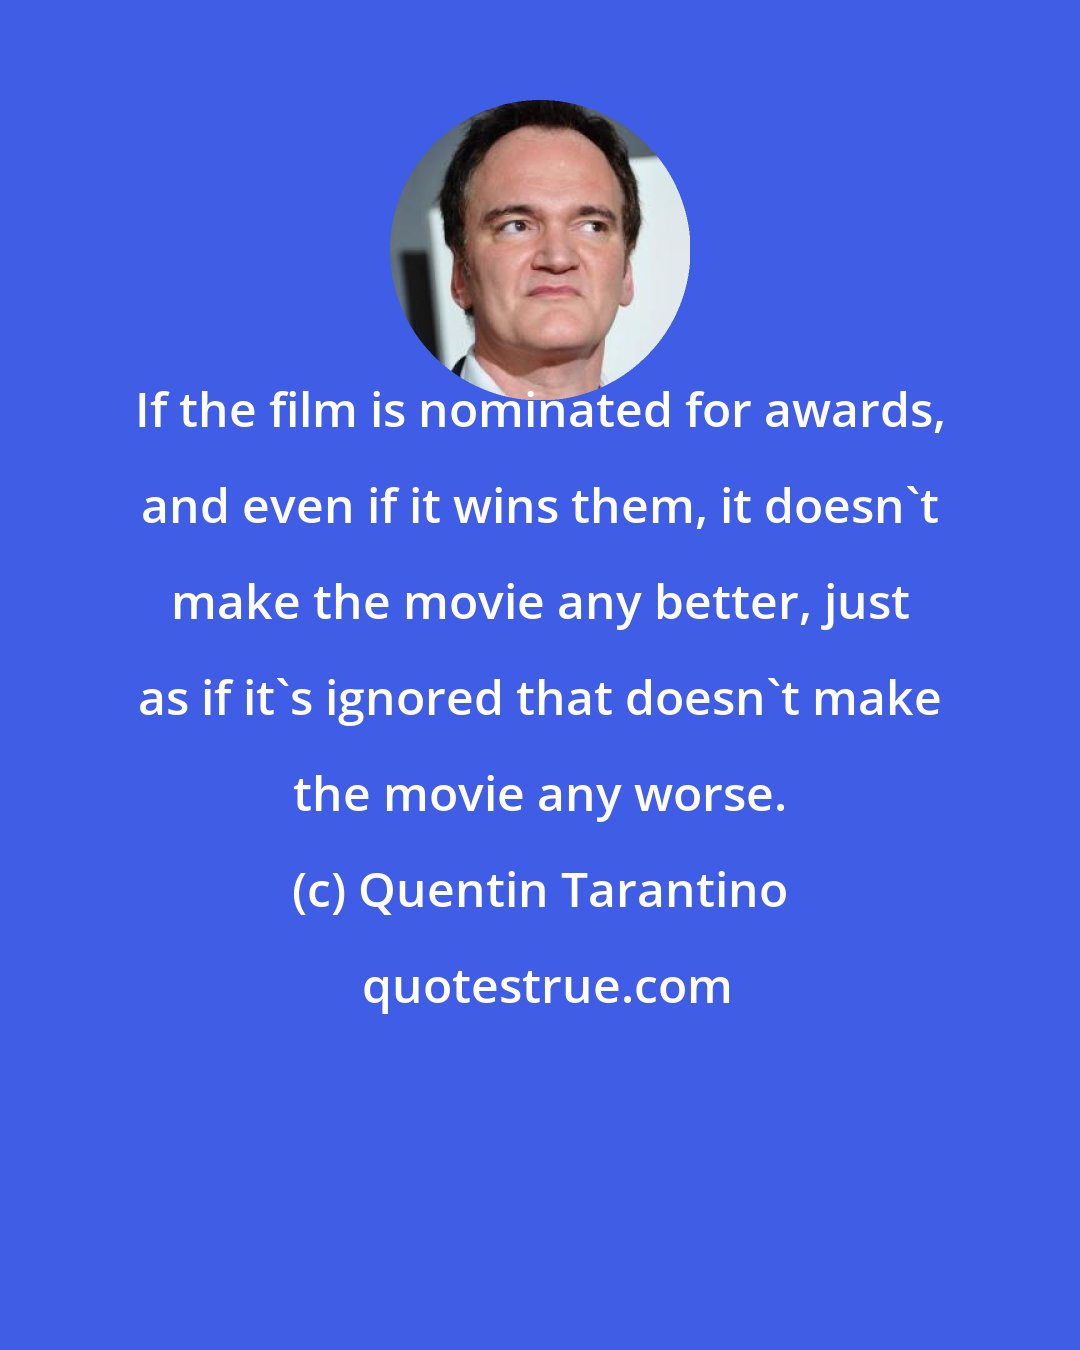 Quentin Tarantino: If the film is nominated for awards, and even if it wins them, it doesn't make the movie any better, just as if it's ignored that doesn't make the movie any worse.